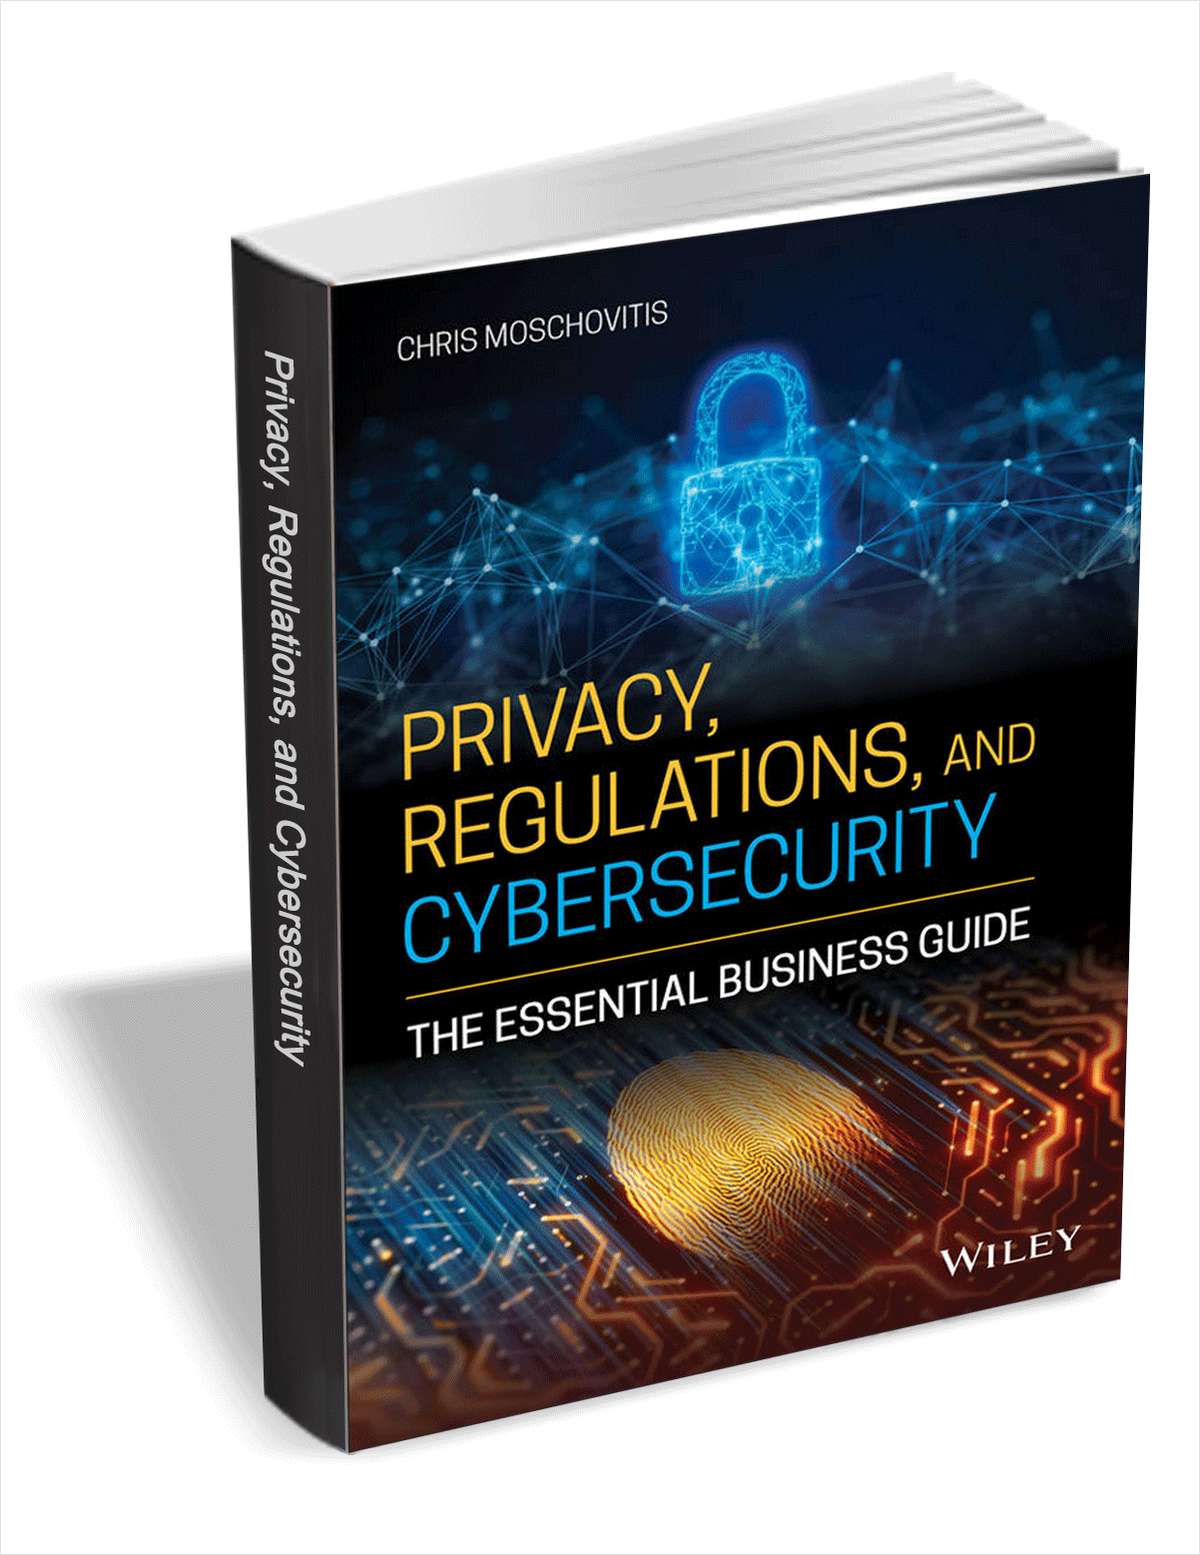 Privacy, Regulations, and Cybersecurity: The Essential Business Guide ($27.00 Value) FREE for a Limited Time